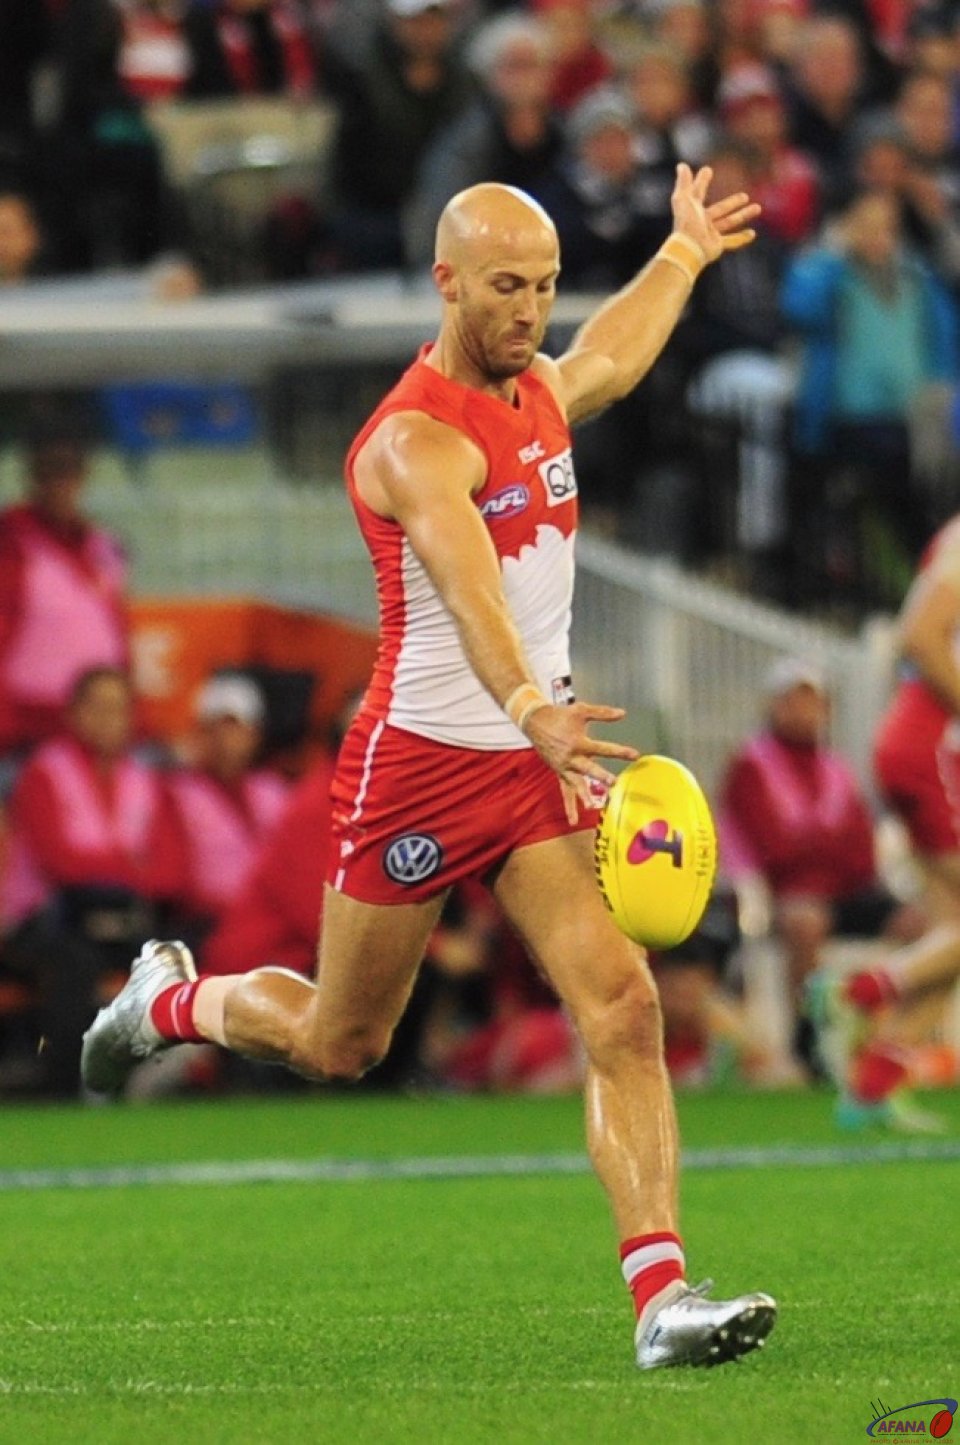 McVeigh shows his form in his 300th AFL Match